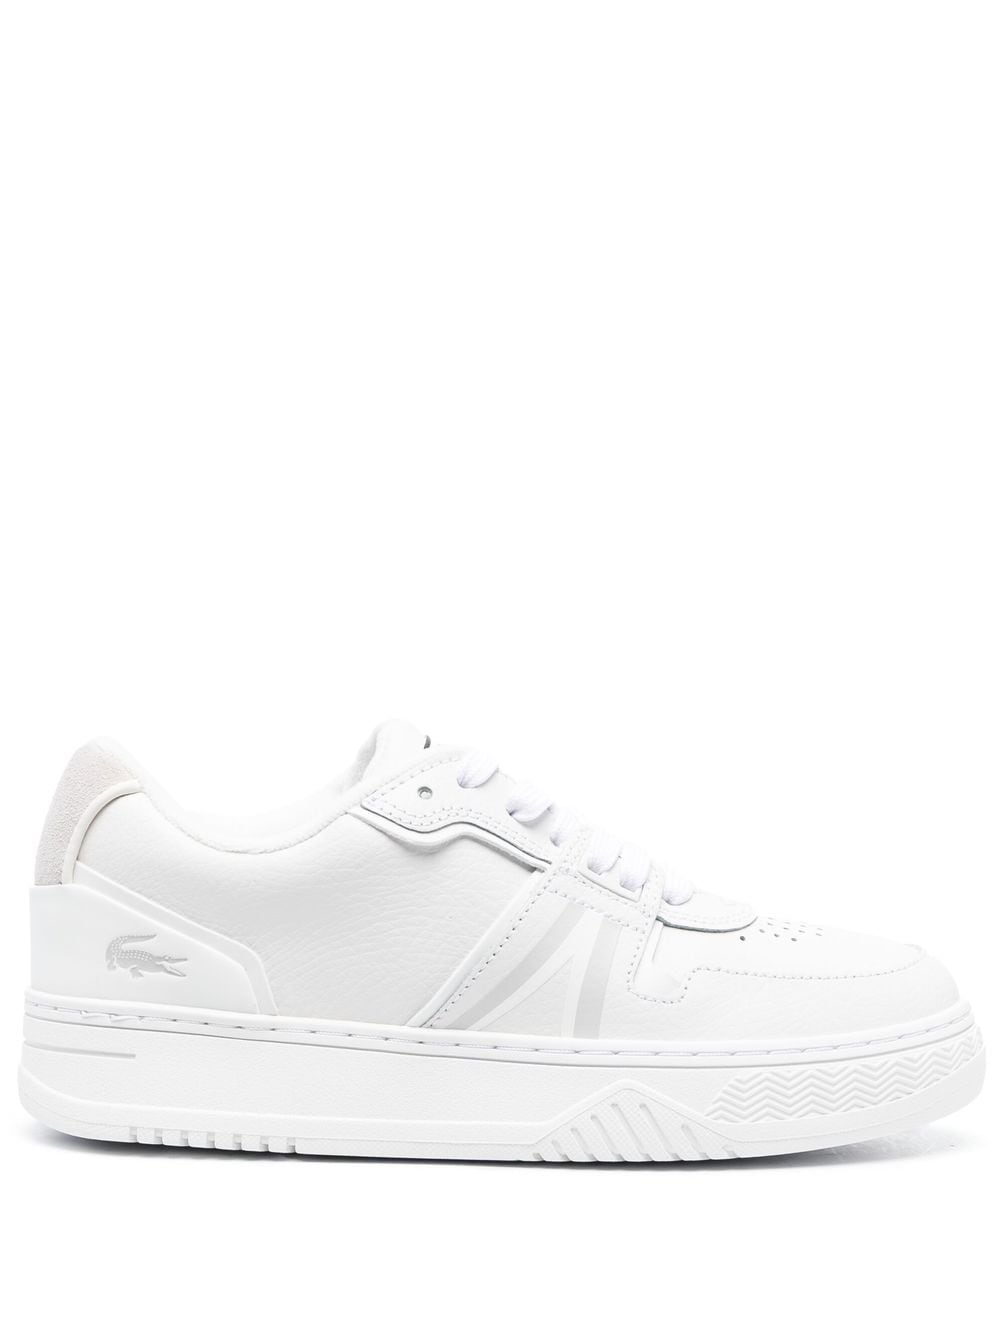 Lacoste logo-print lace-up sneakers - White von Lacoste